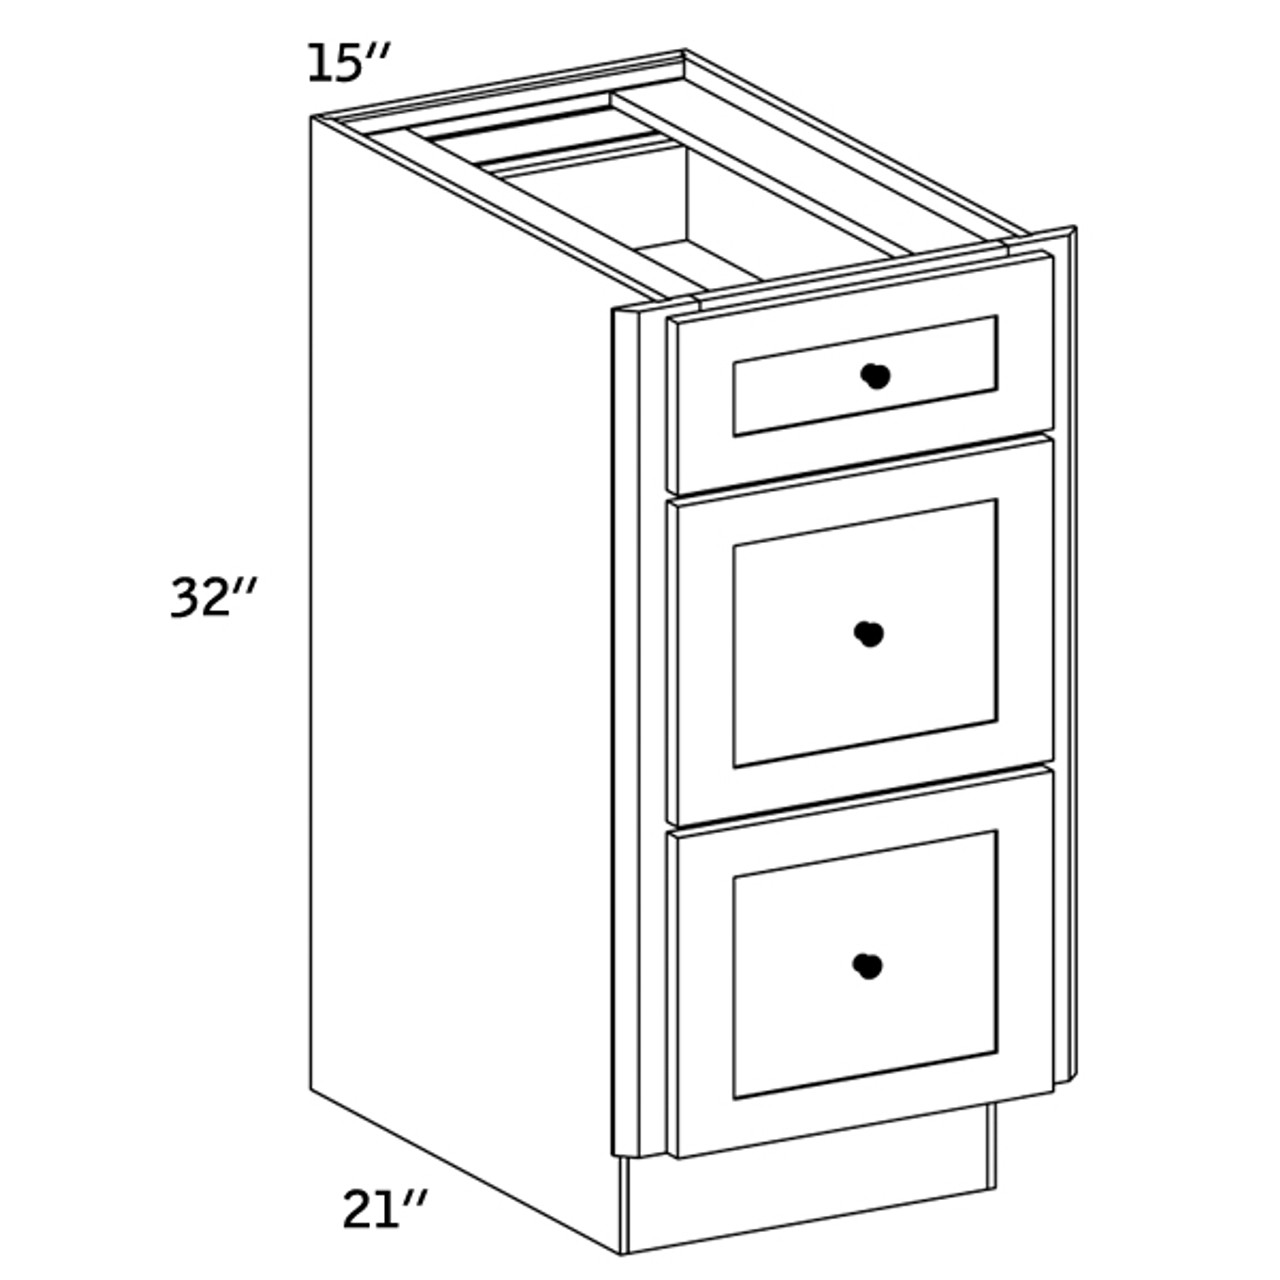 Vdb15 Vanity 3 Drawer Base Cabinet Cms8000 Galaxy Cabinetry